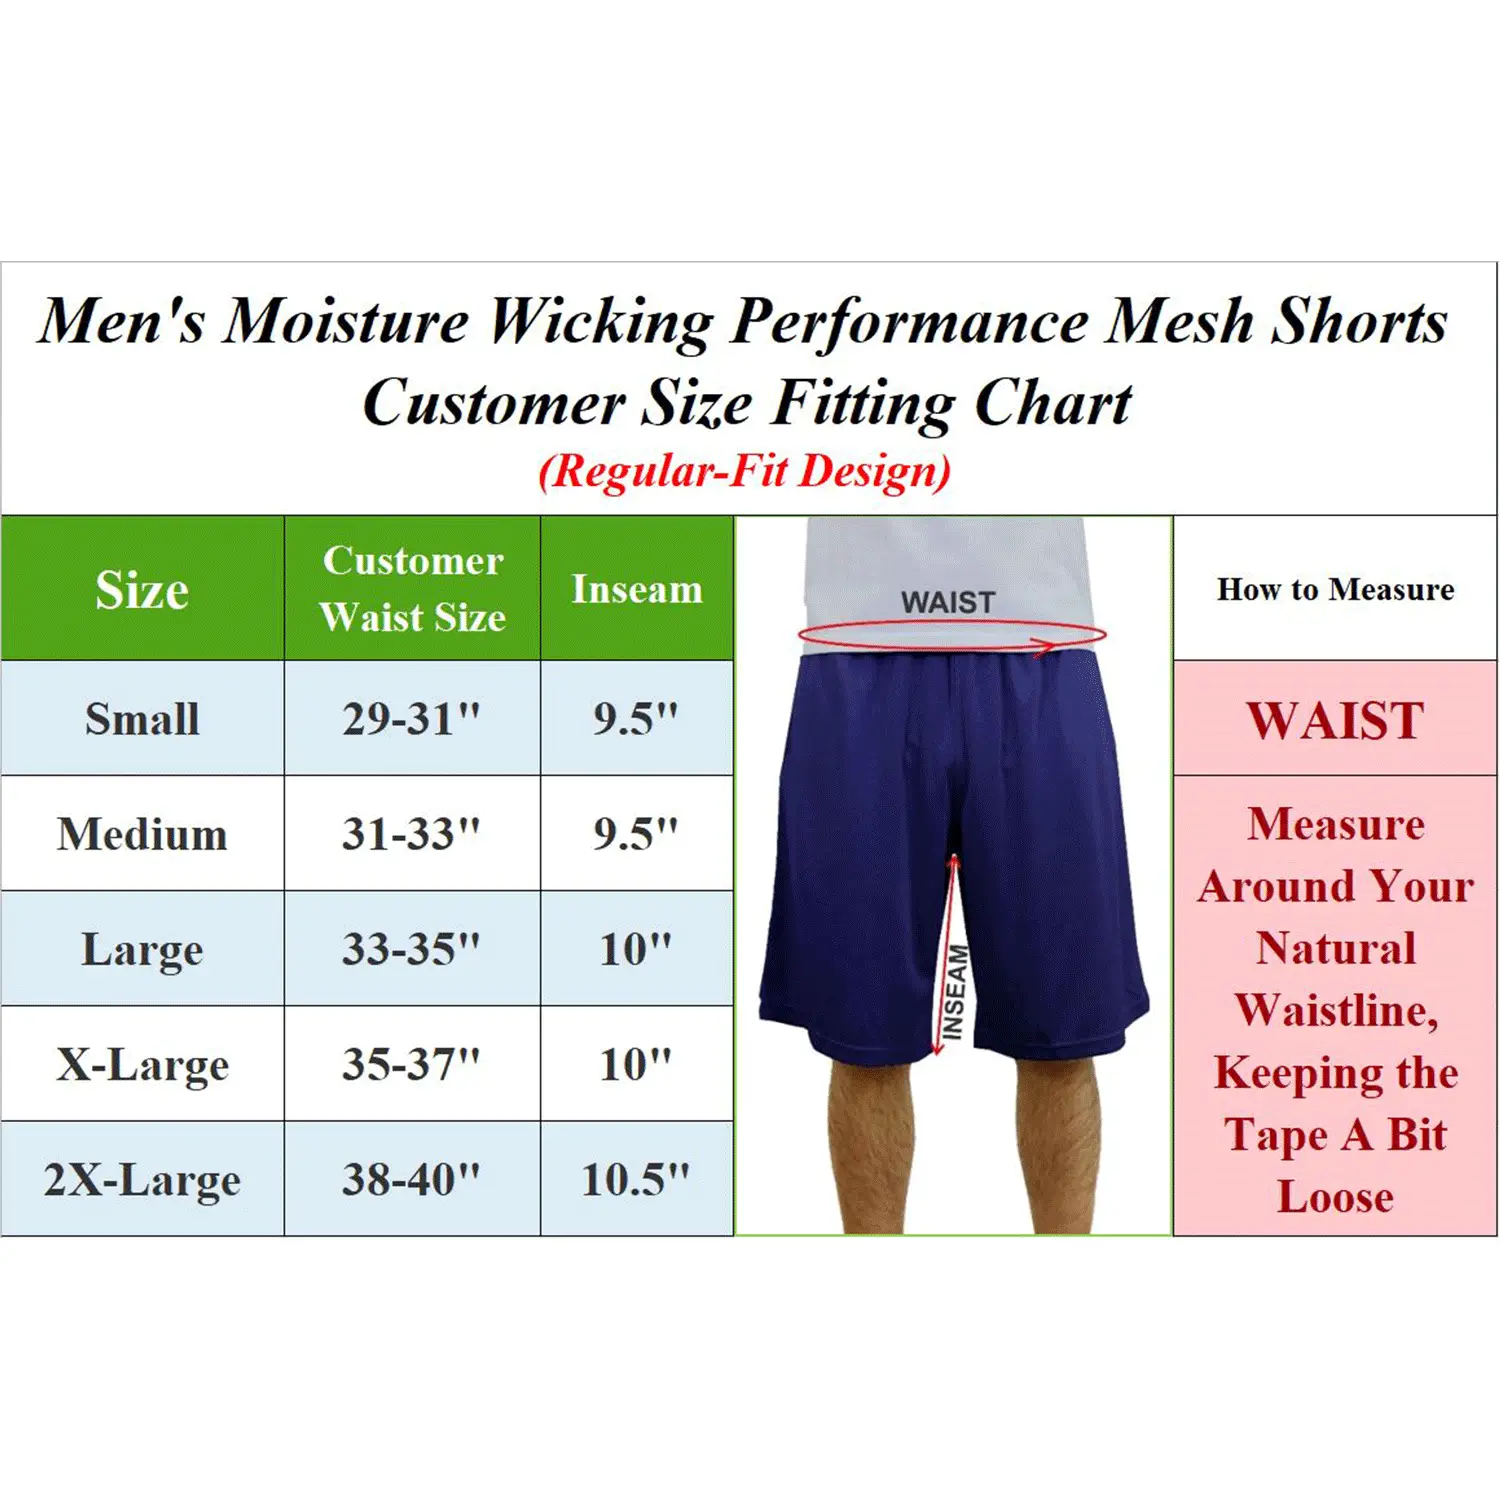 Men's 5-Pack Moisture Wicking Mesh Shorts With Side Trim Design